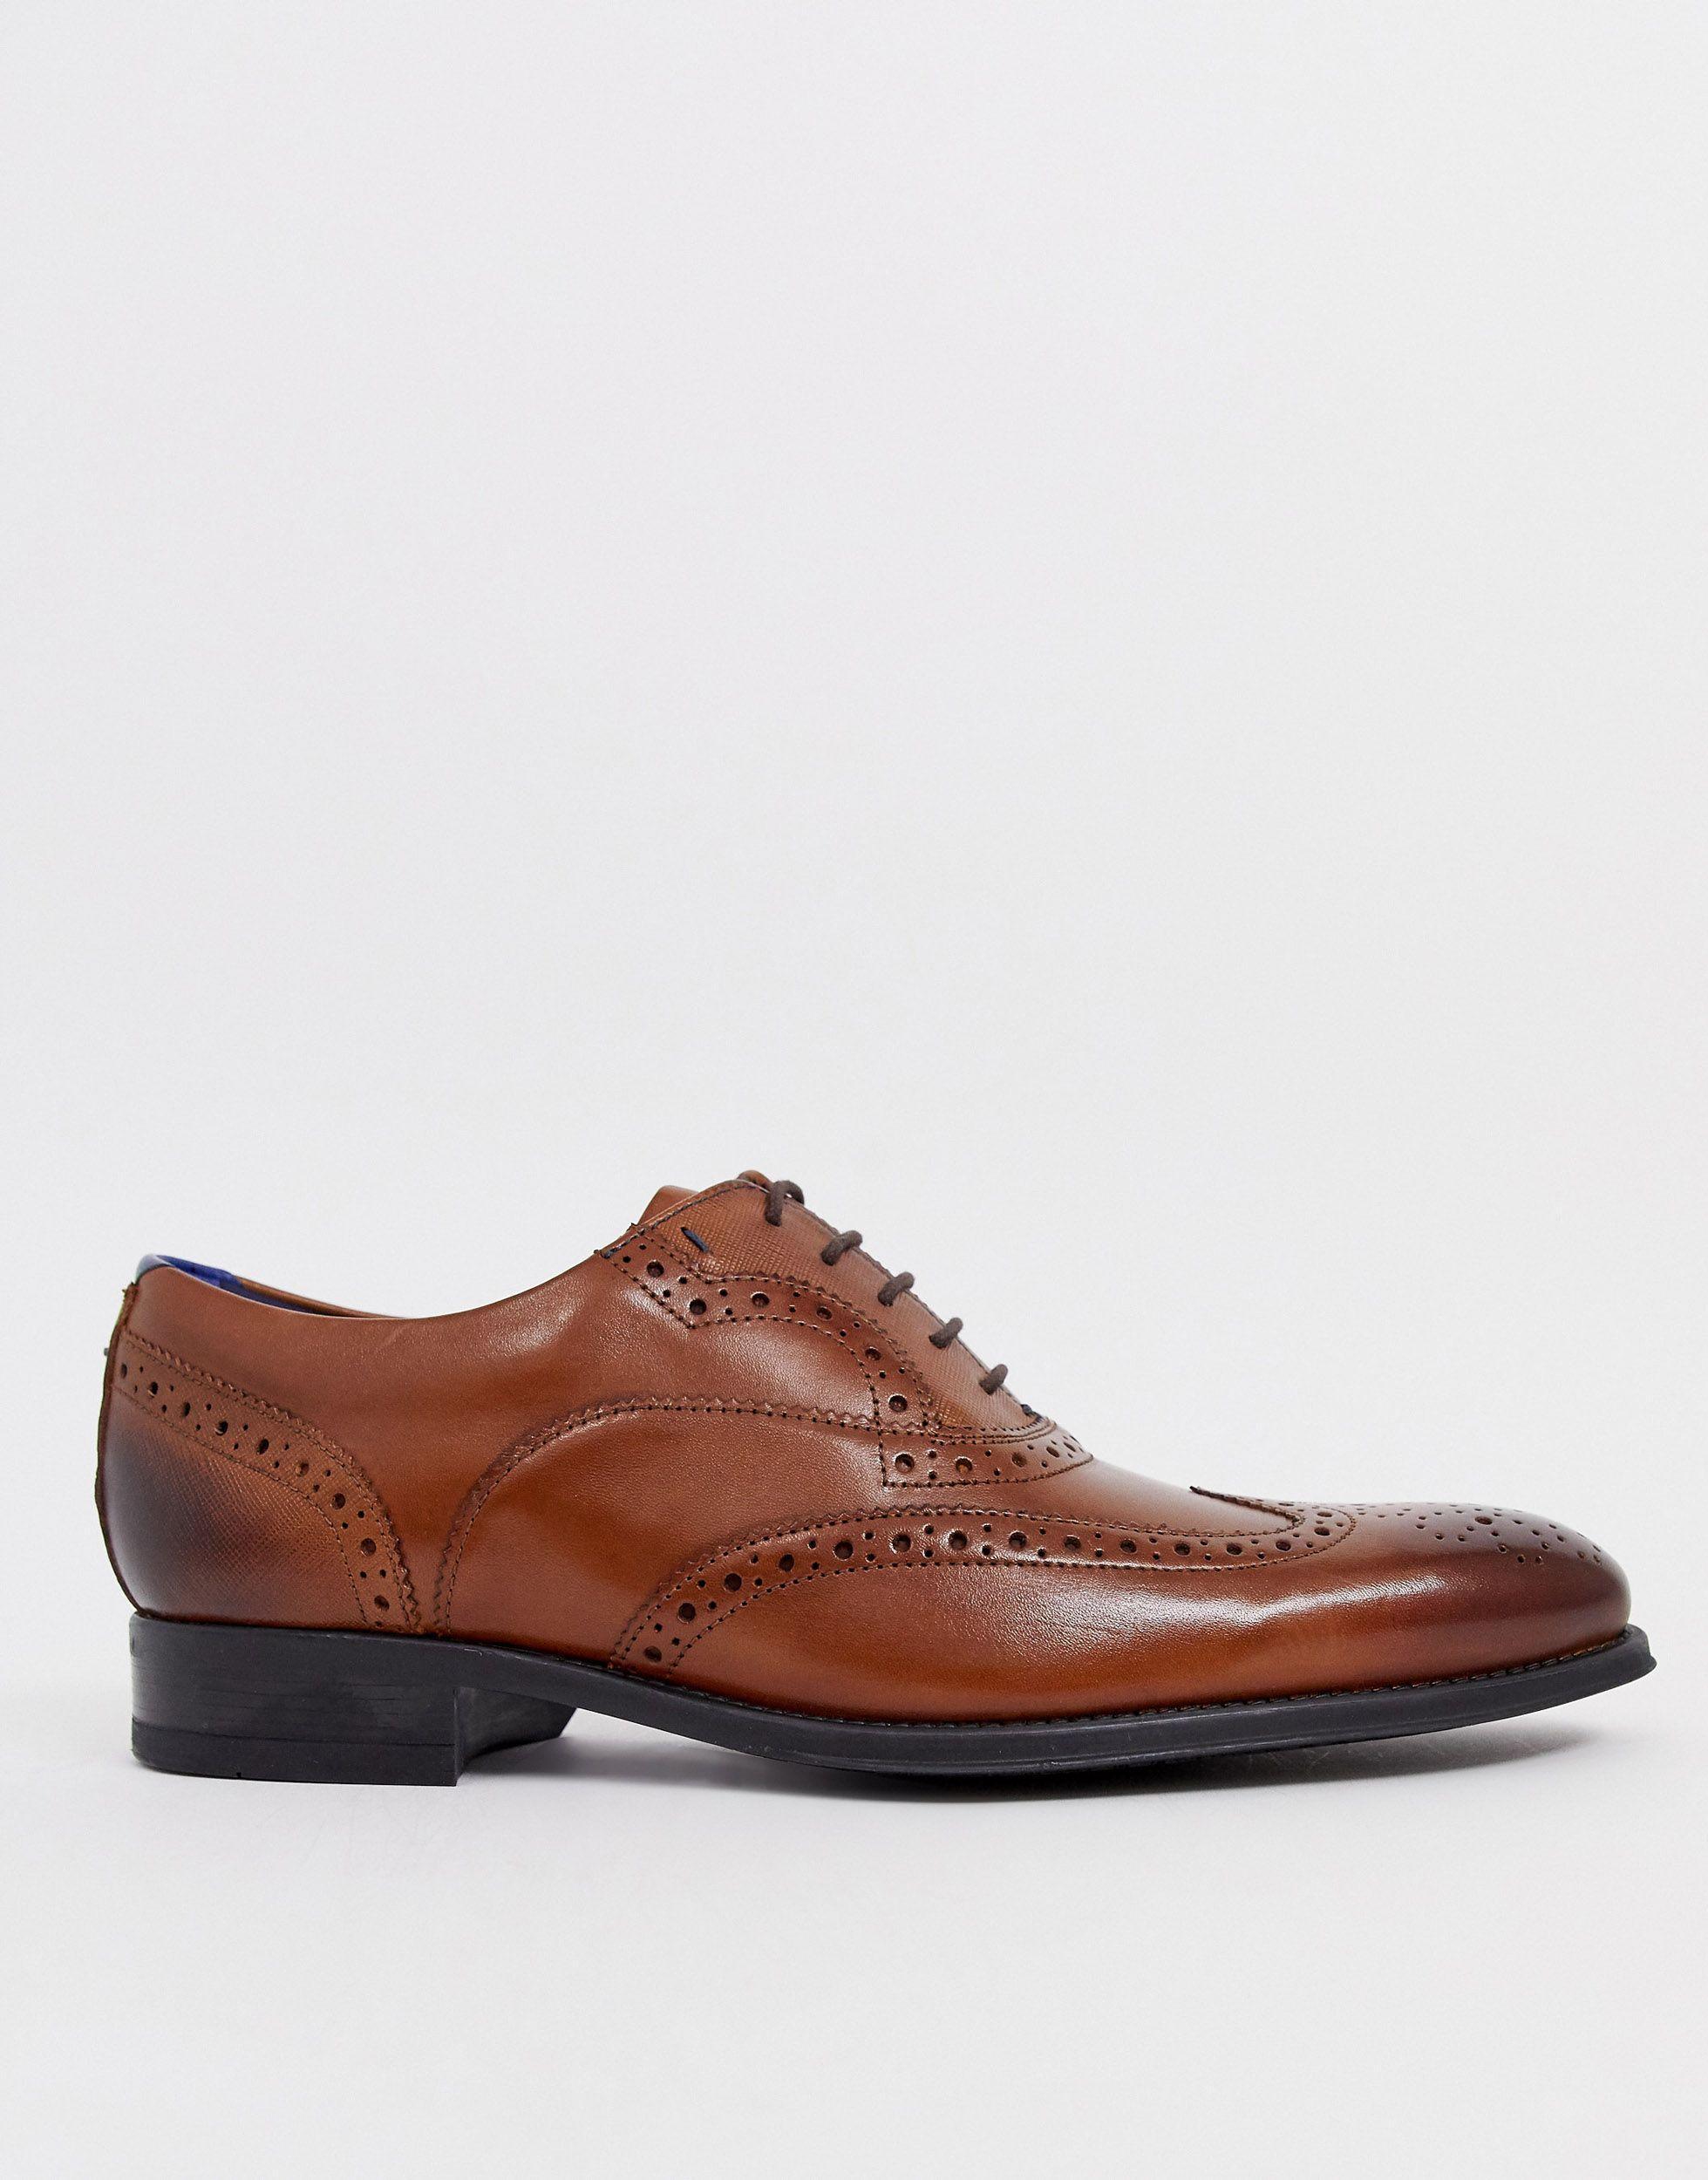 Ted Baker Leather Mitack Brogues in Tan 